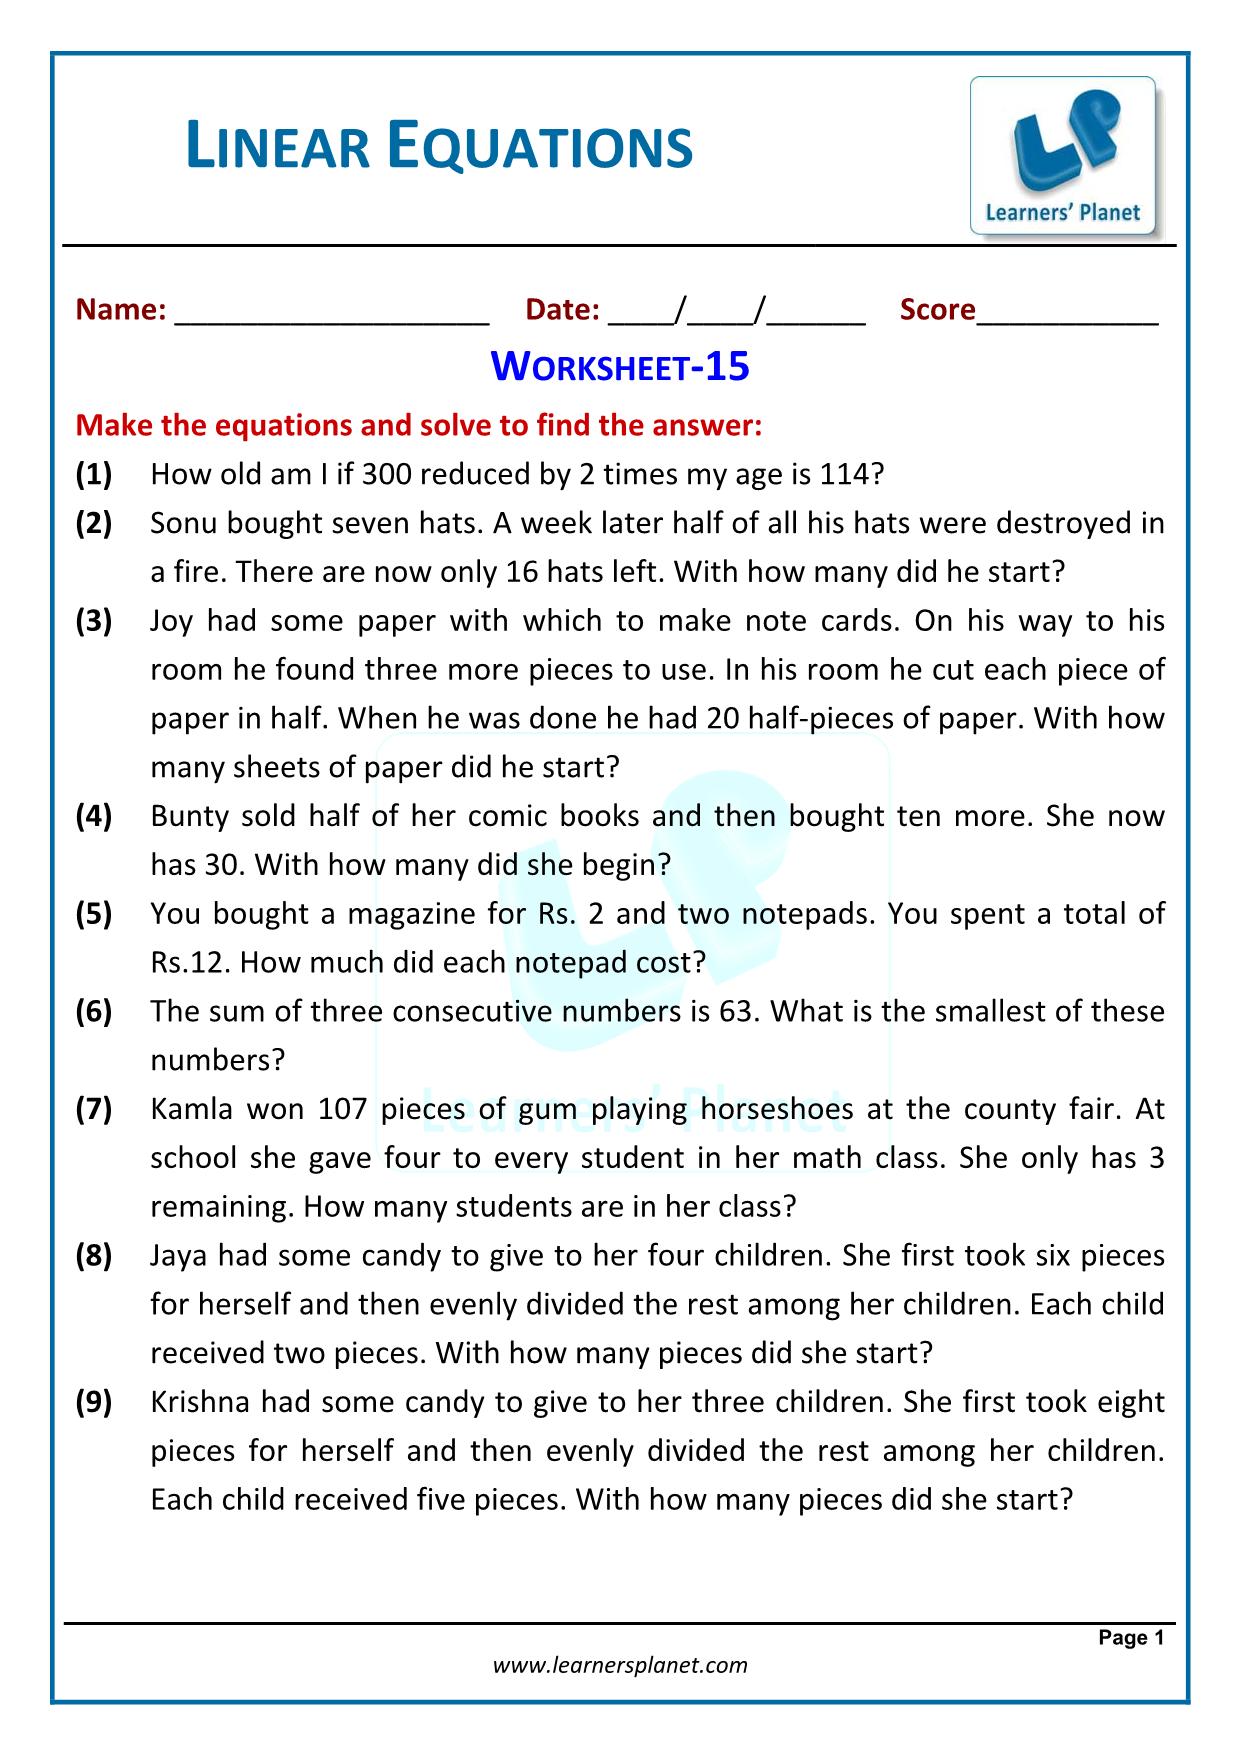 Linear equation word problems worksheet with answer Inside Linear Equations Word Problems Worksheet